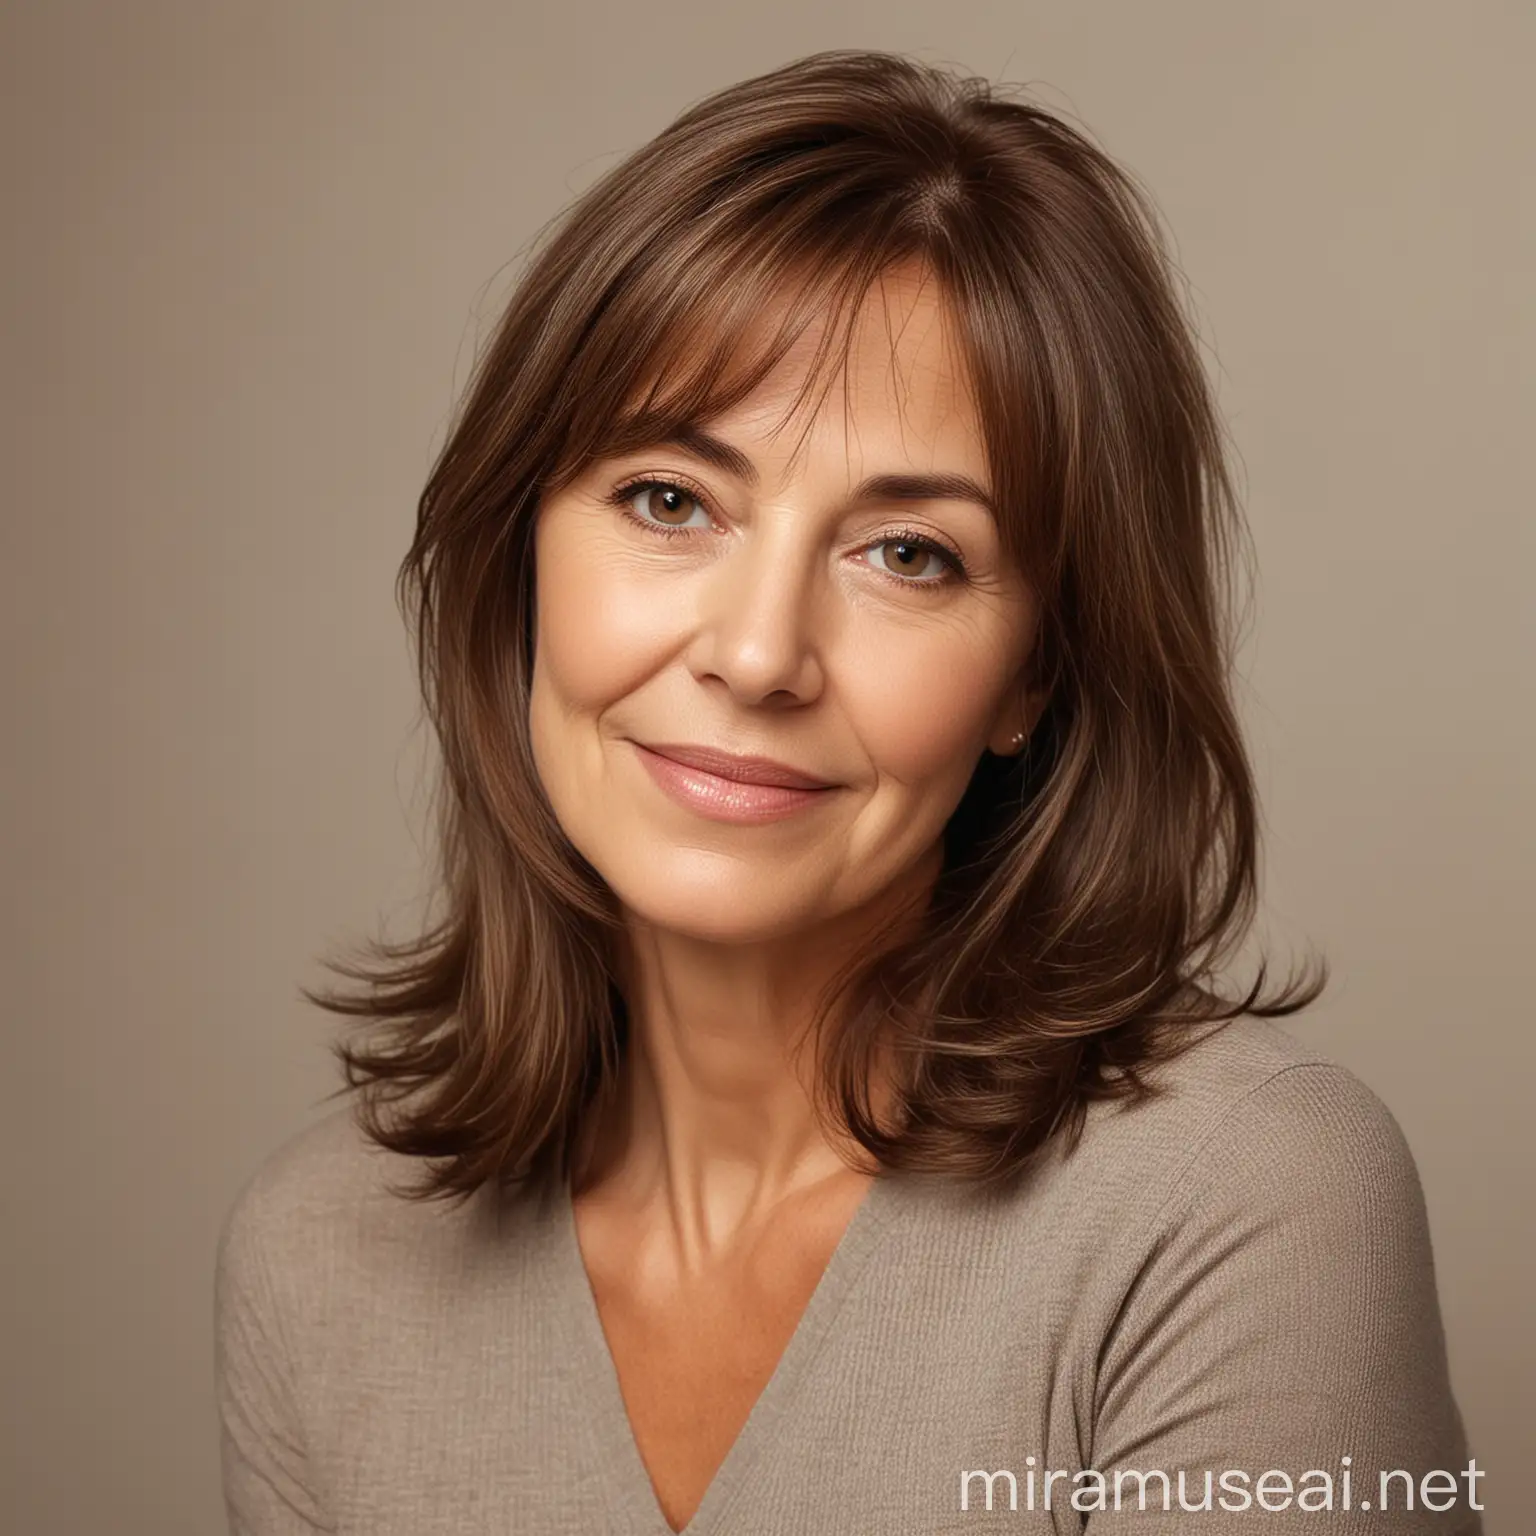 Mature Woman with Brown Hair Portrait of a 50YearOld Female